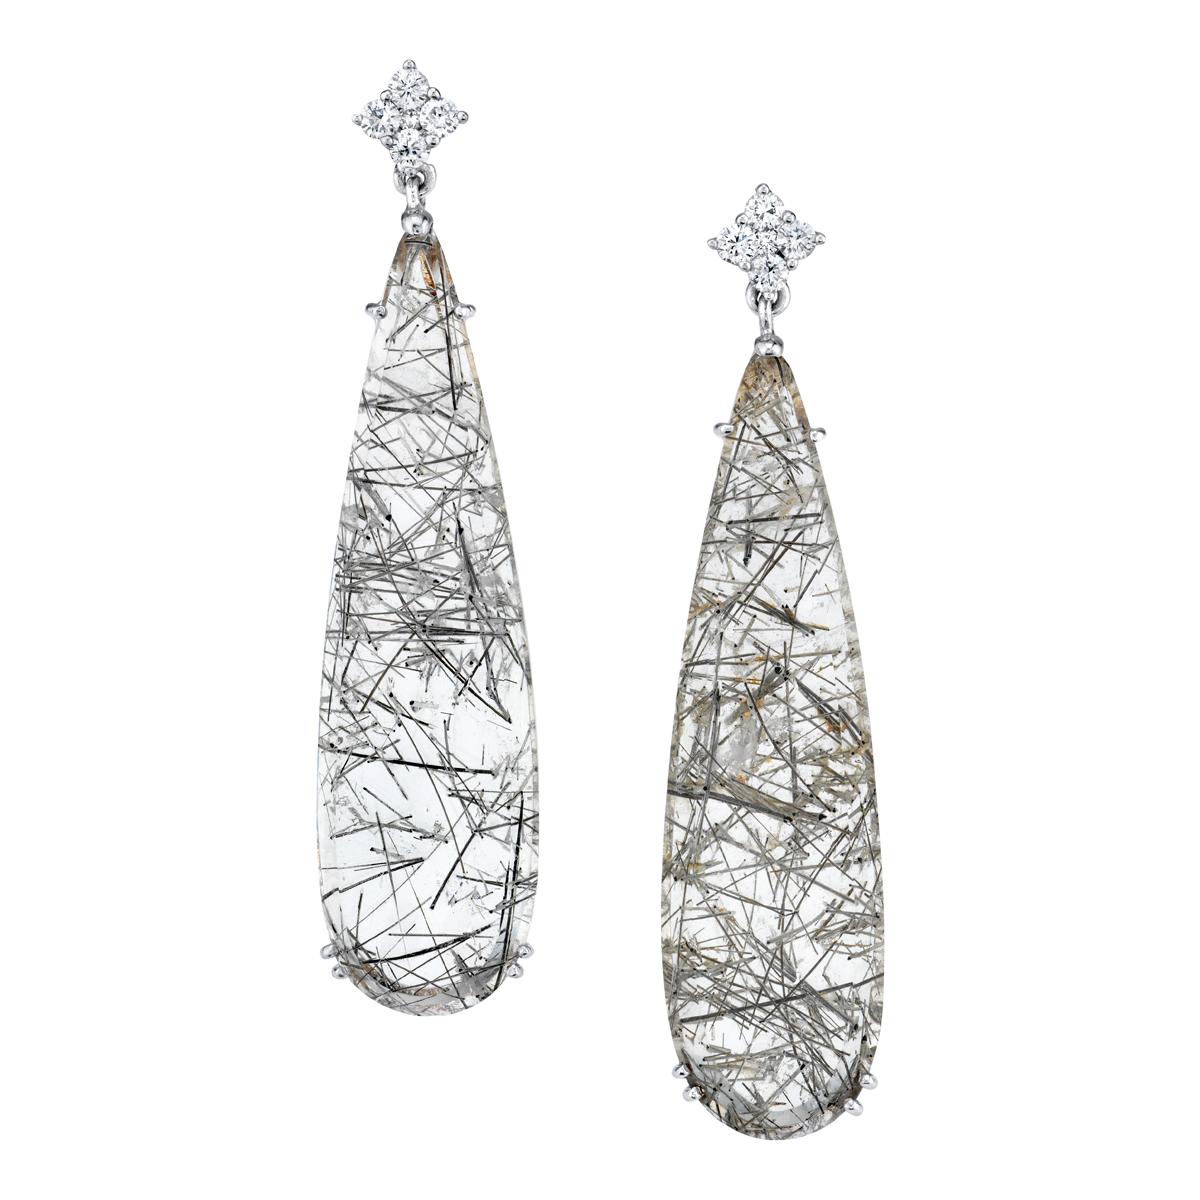 Actinolated Quartz and Diamond Drop Earrings in White Gold, 36.37 Carats Total For Sale